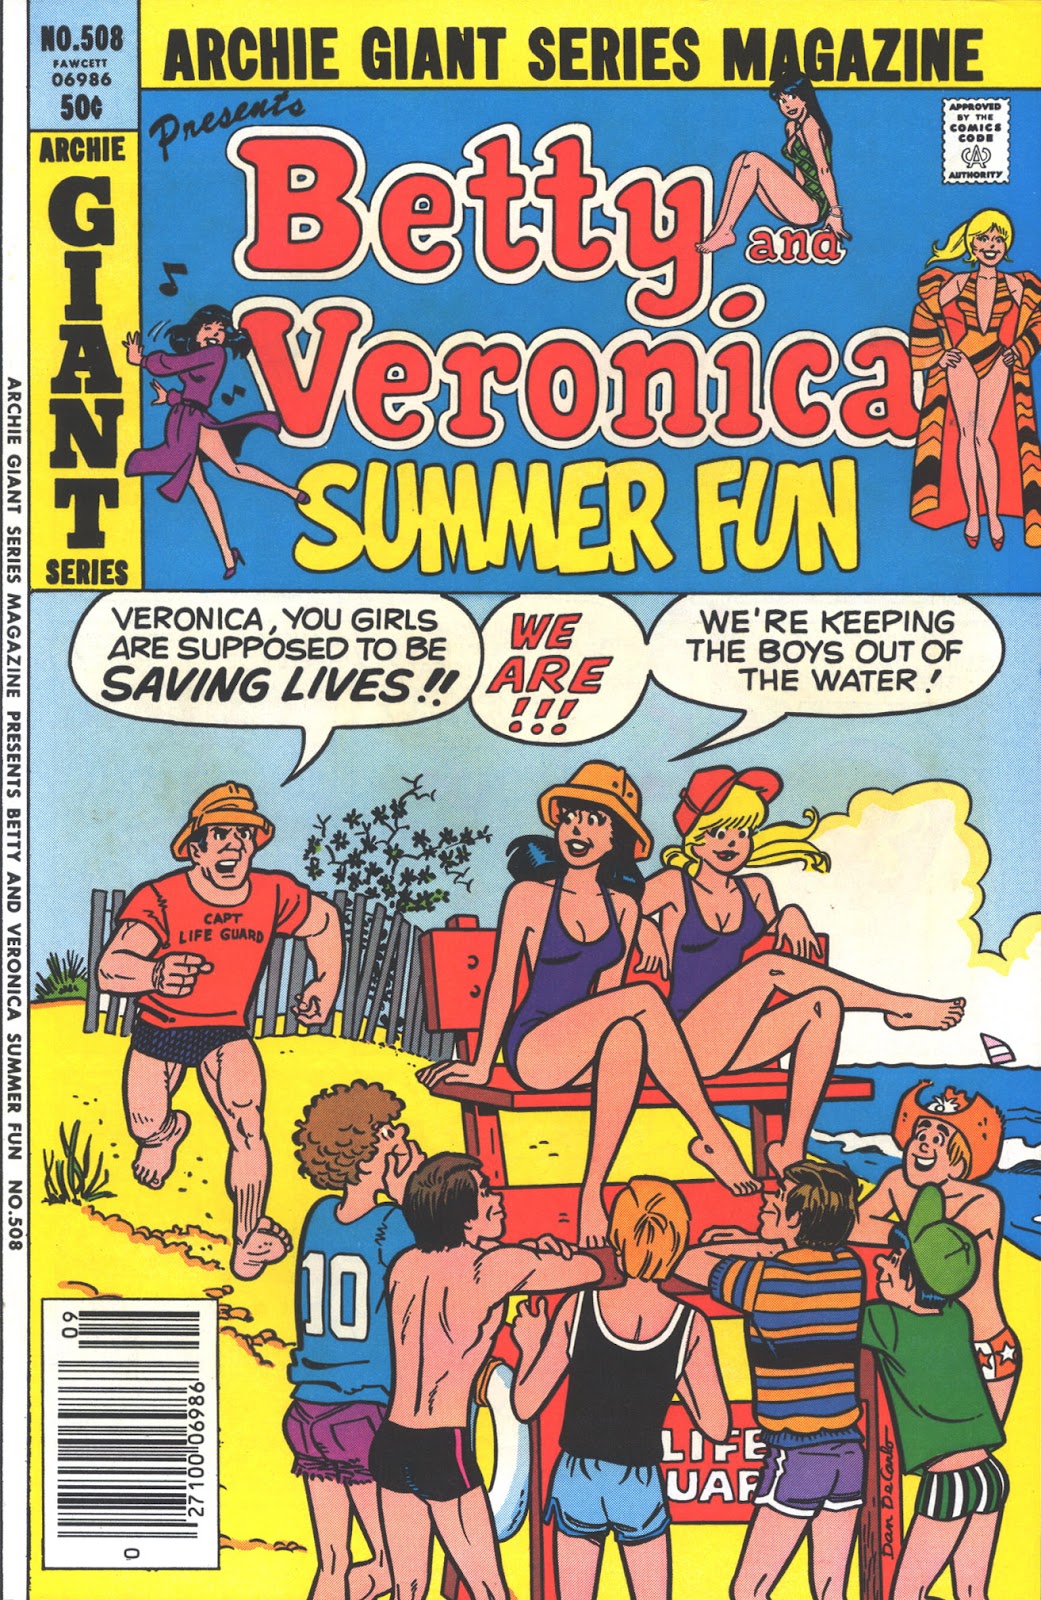 Archie Giant Series Magazine issue 508 - Page 1